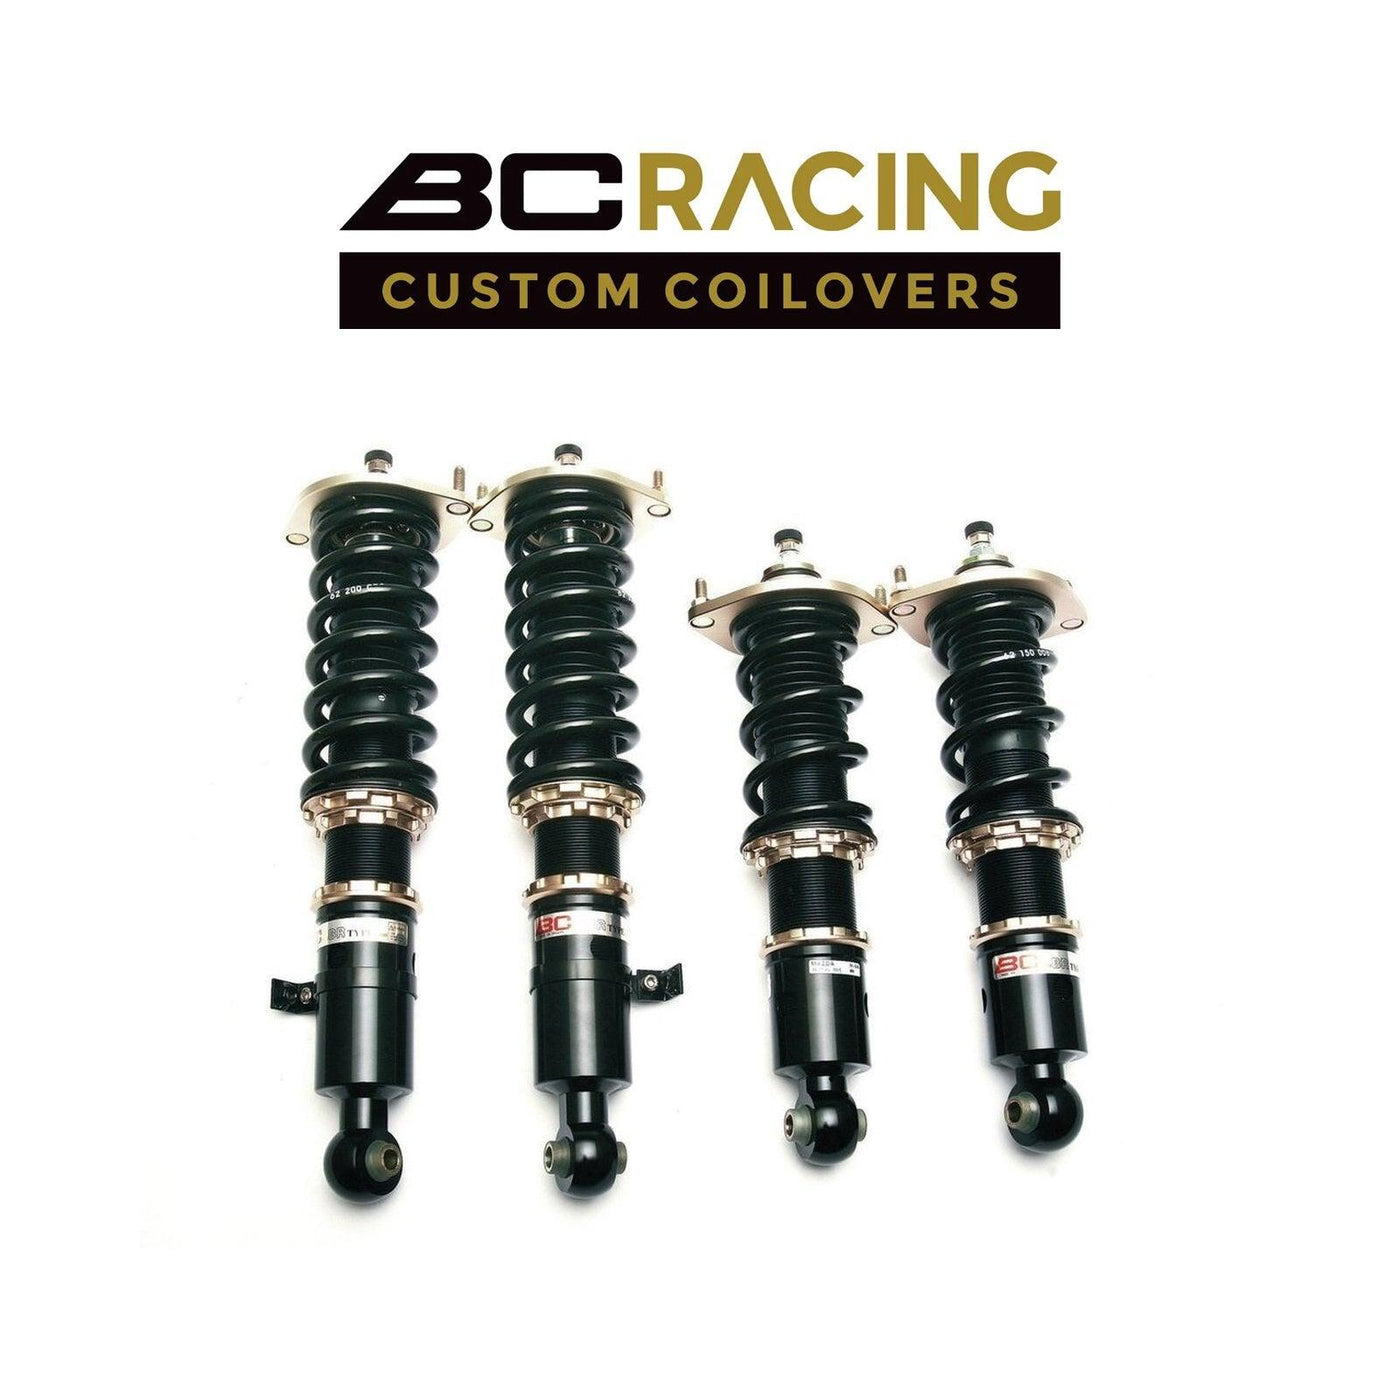 BC Racing Coilovers 2001-2003 HONDA Acura CL - Attacking the Clock Racing